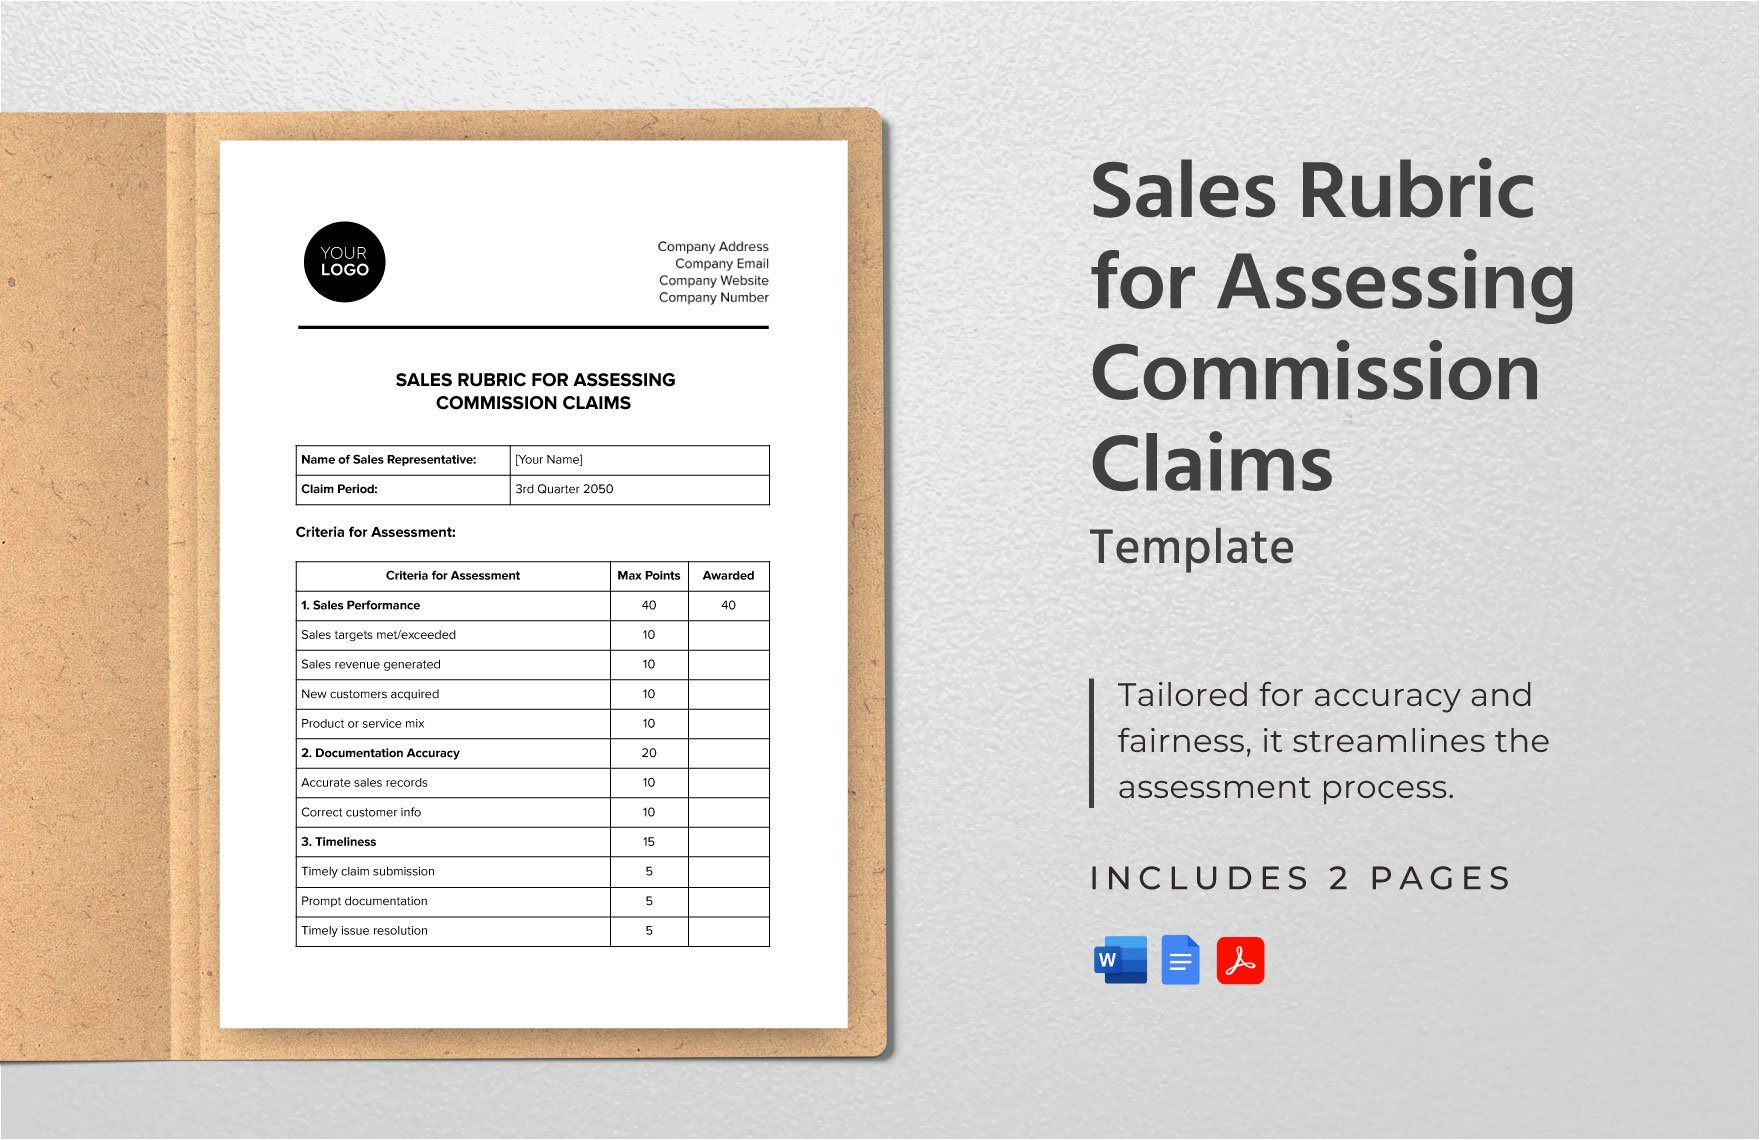 Sales Rubric for Assessing Commission Claims Template in Word, Google Docs, PDF